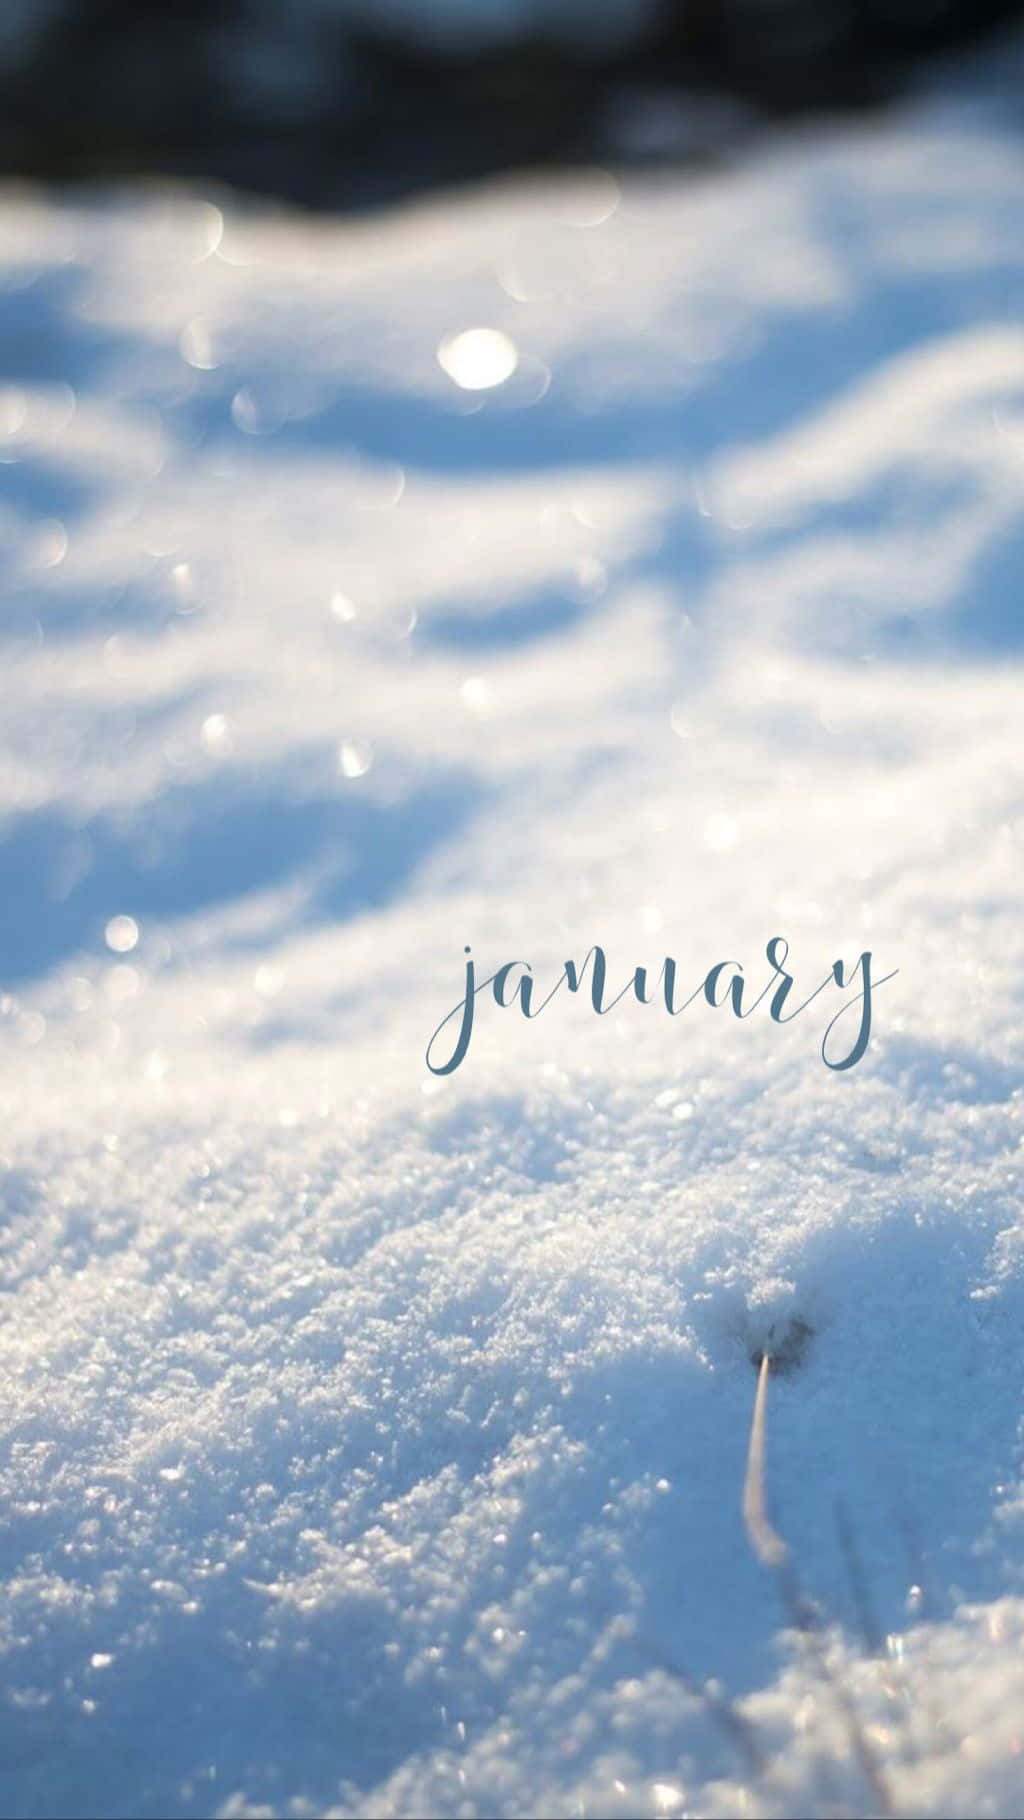 January - A Snowy Scene With The Words January Wallpaper